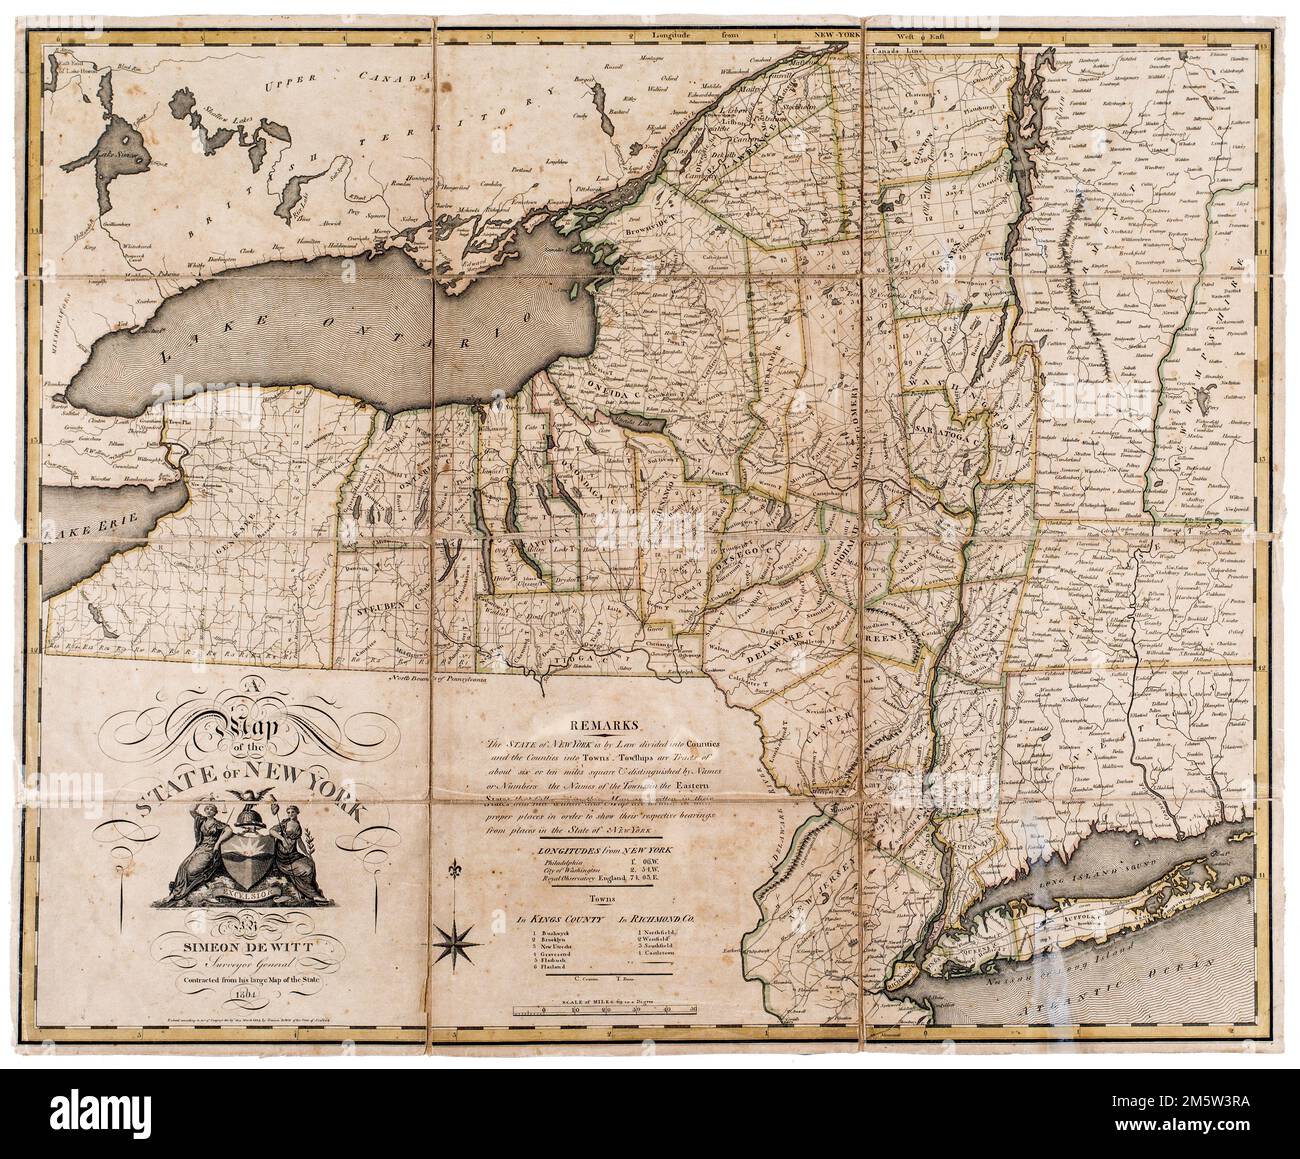 A map of the state of New York. Shows county and town boundaries. Relief shown pictorially. 'Contracted from his large map of the state.' 'Entered according to Act of Congress the 19th day March 1804 by Simeon DeWitt of the state of New York.' Includes text, decorative cartouche, longitudes from New York, and index to towns in Kings and Richmond counties.... , New York Stock Photo